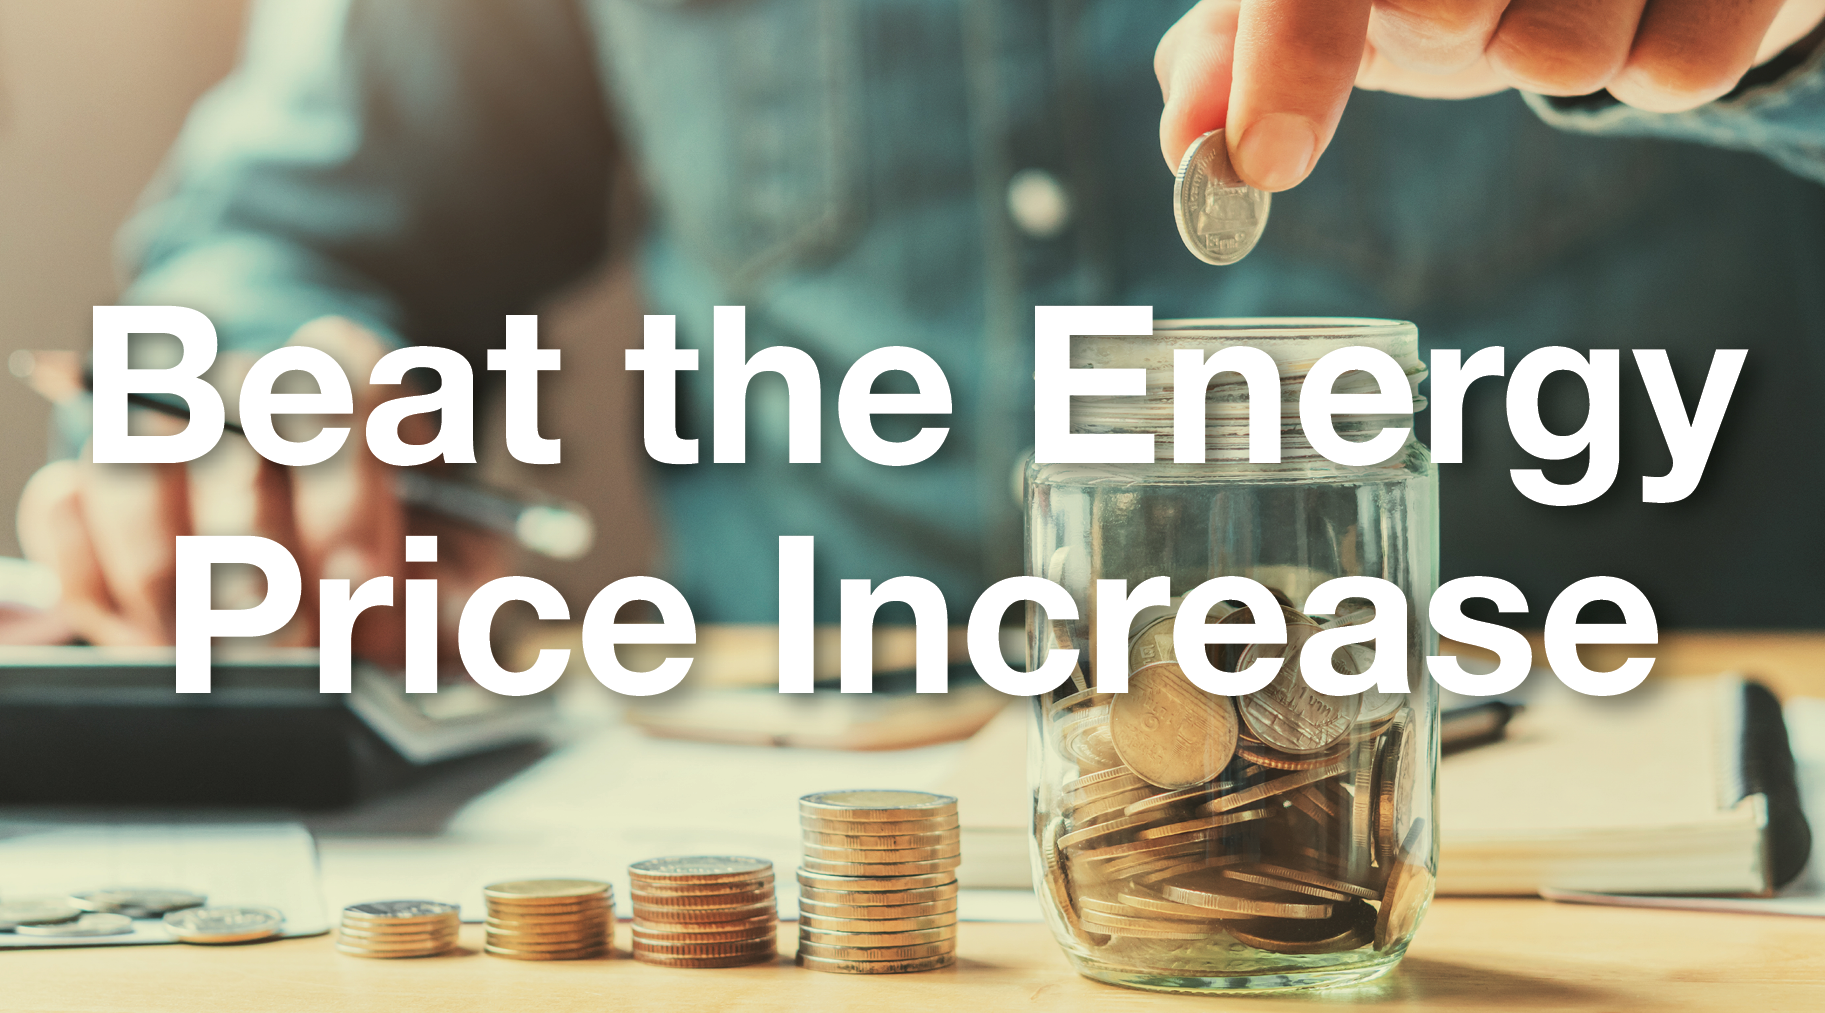 How to insulate your home and beat energy price increases